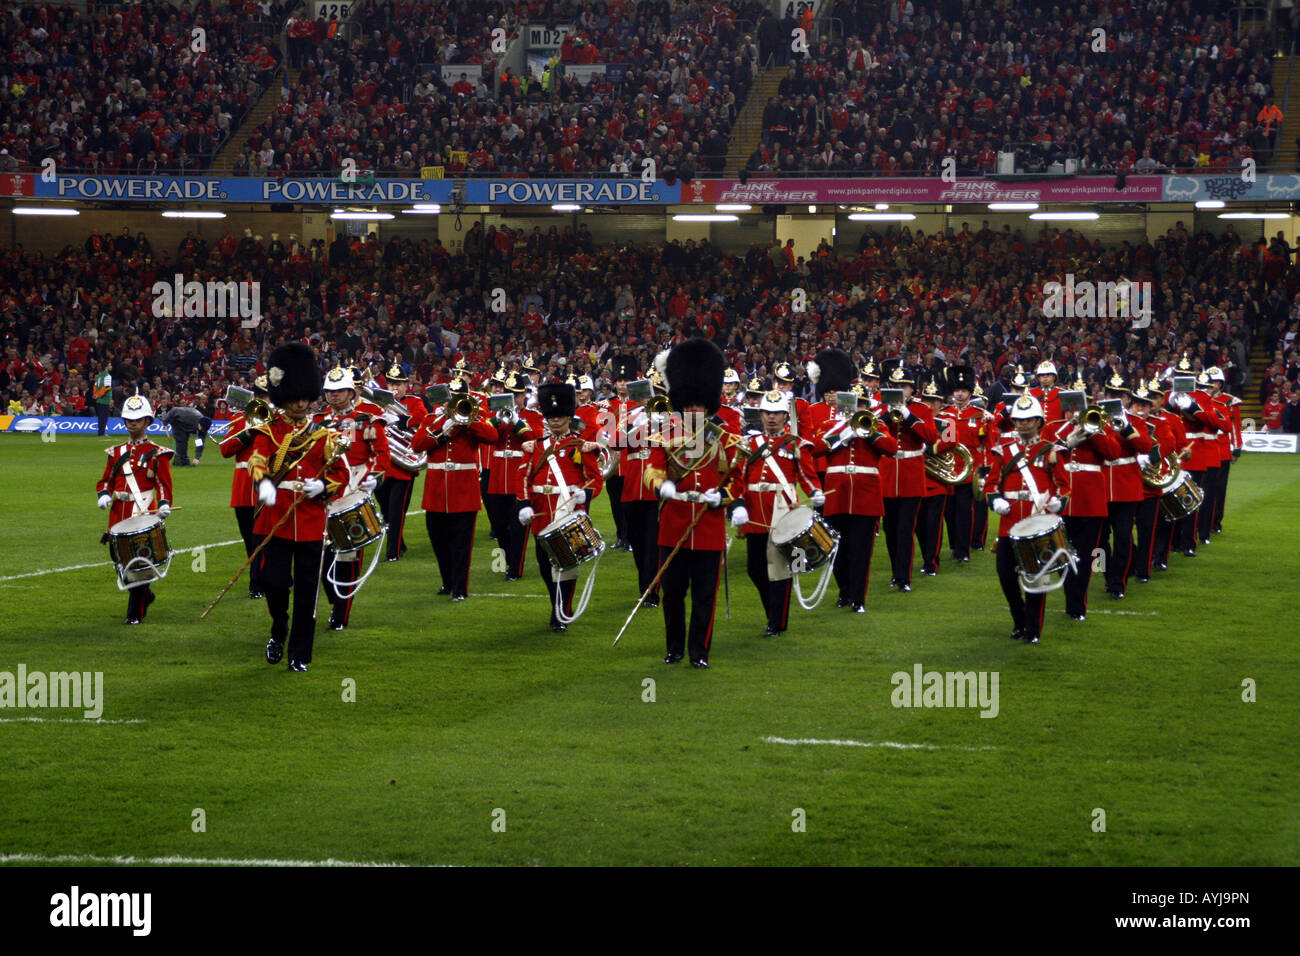 Regimental Band of The Royal Welsh Regiment marching in the Millenium Stadium, Cardiff before the Wales v France Grand Slam game Stock Photo